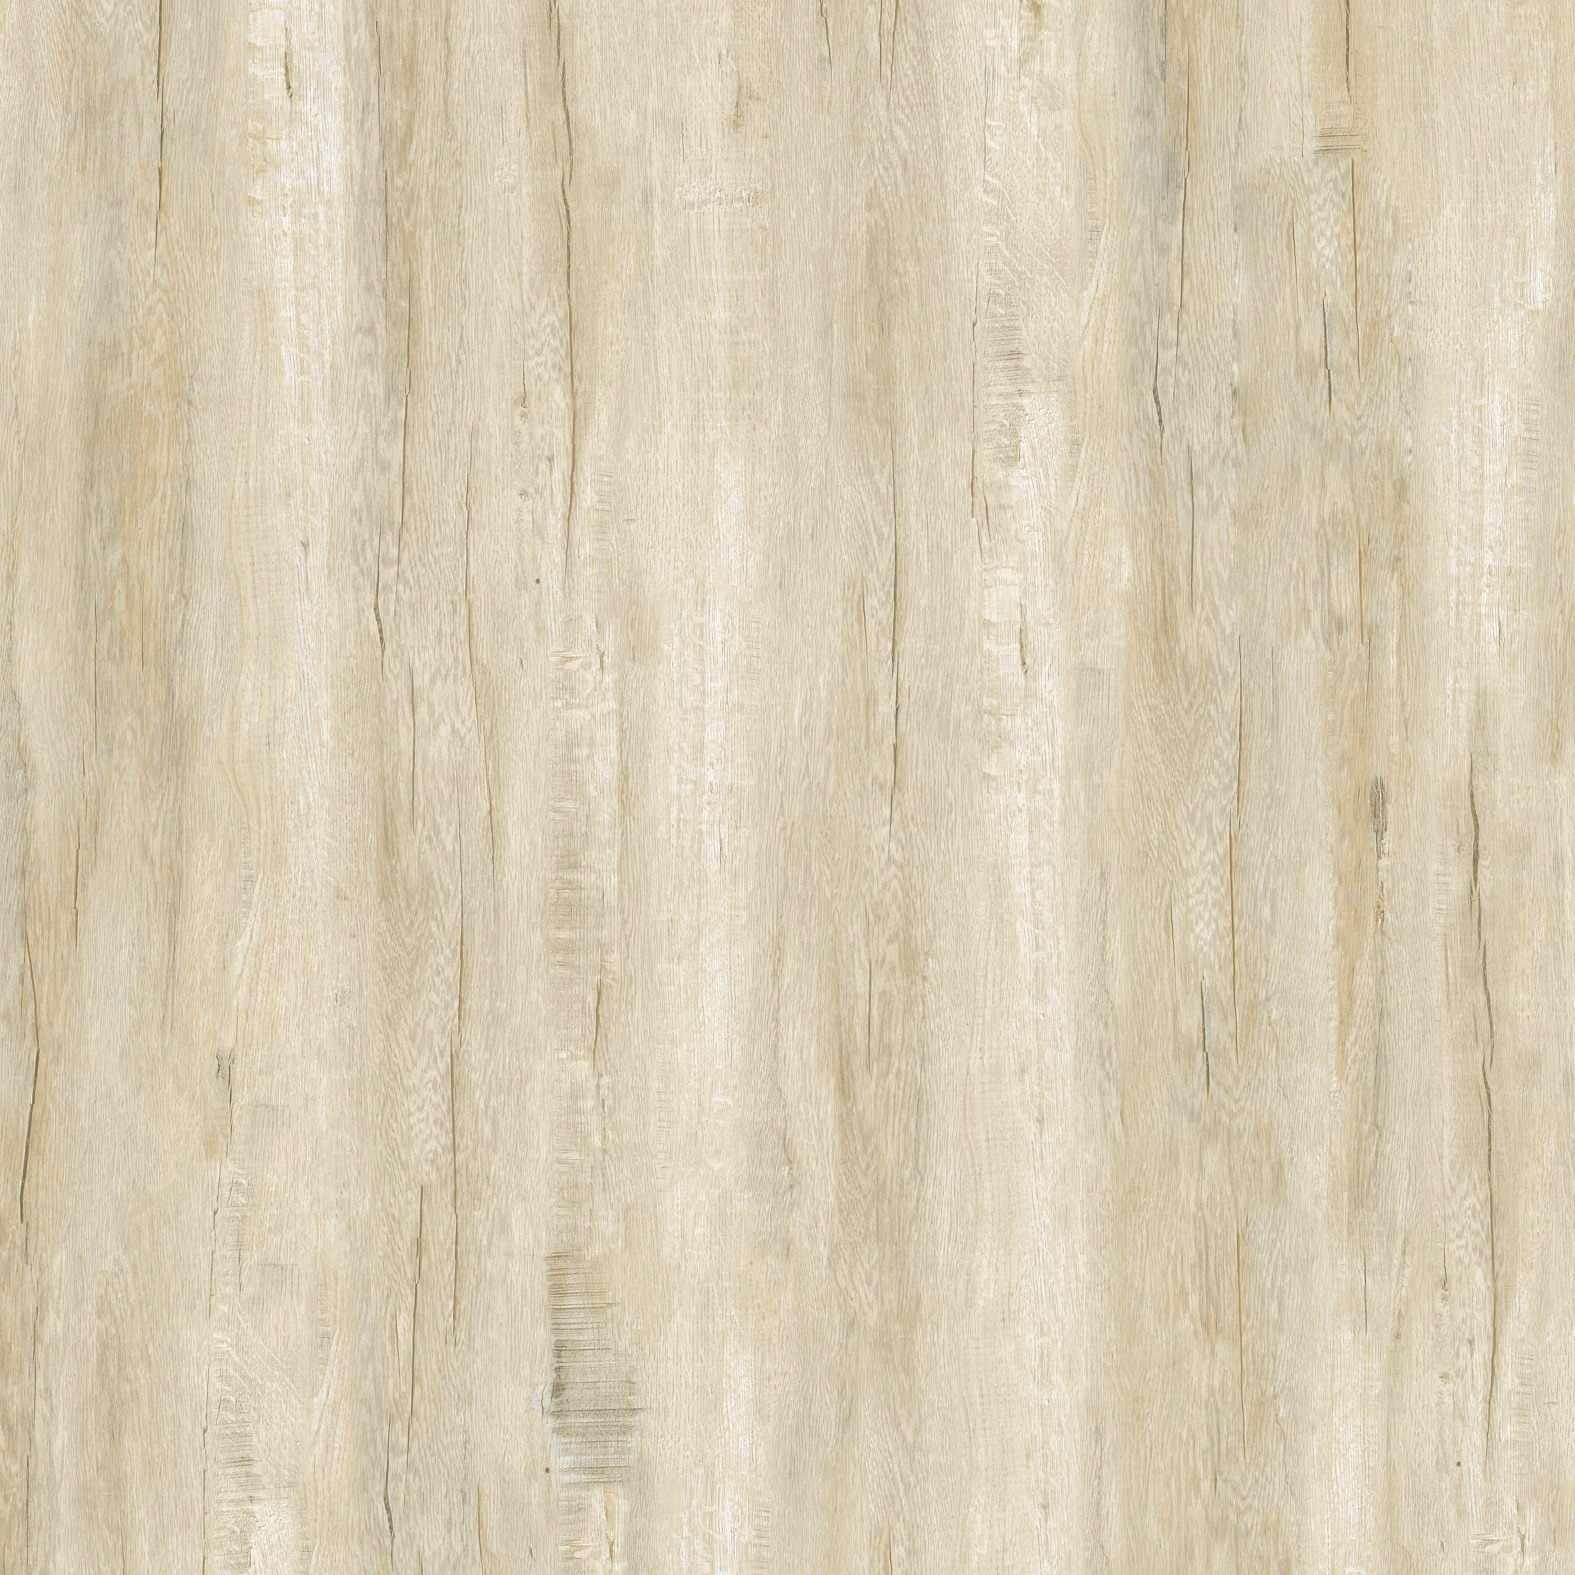 Kitchen wall tiles- Full polished marble tiles Wooden tiles VPM6144H VPM6125H VPM6123H VPM6124H VPM6173H VPM6141H VPM6181H-60x6